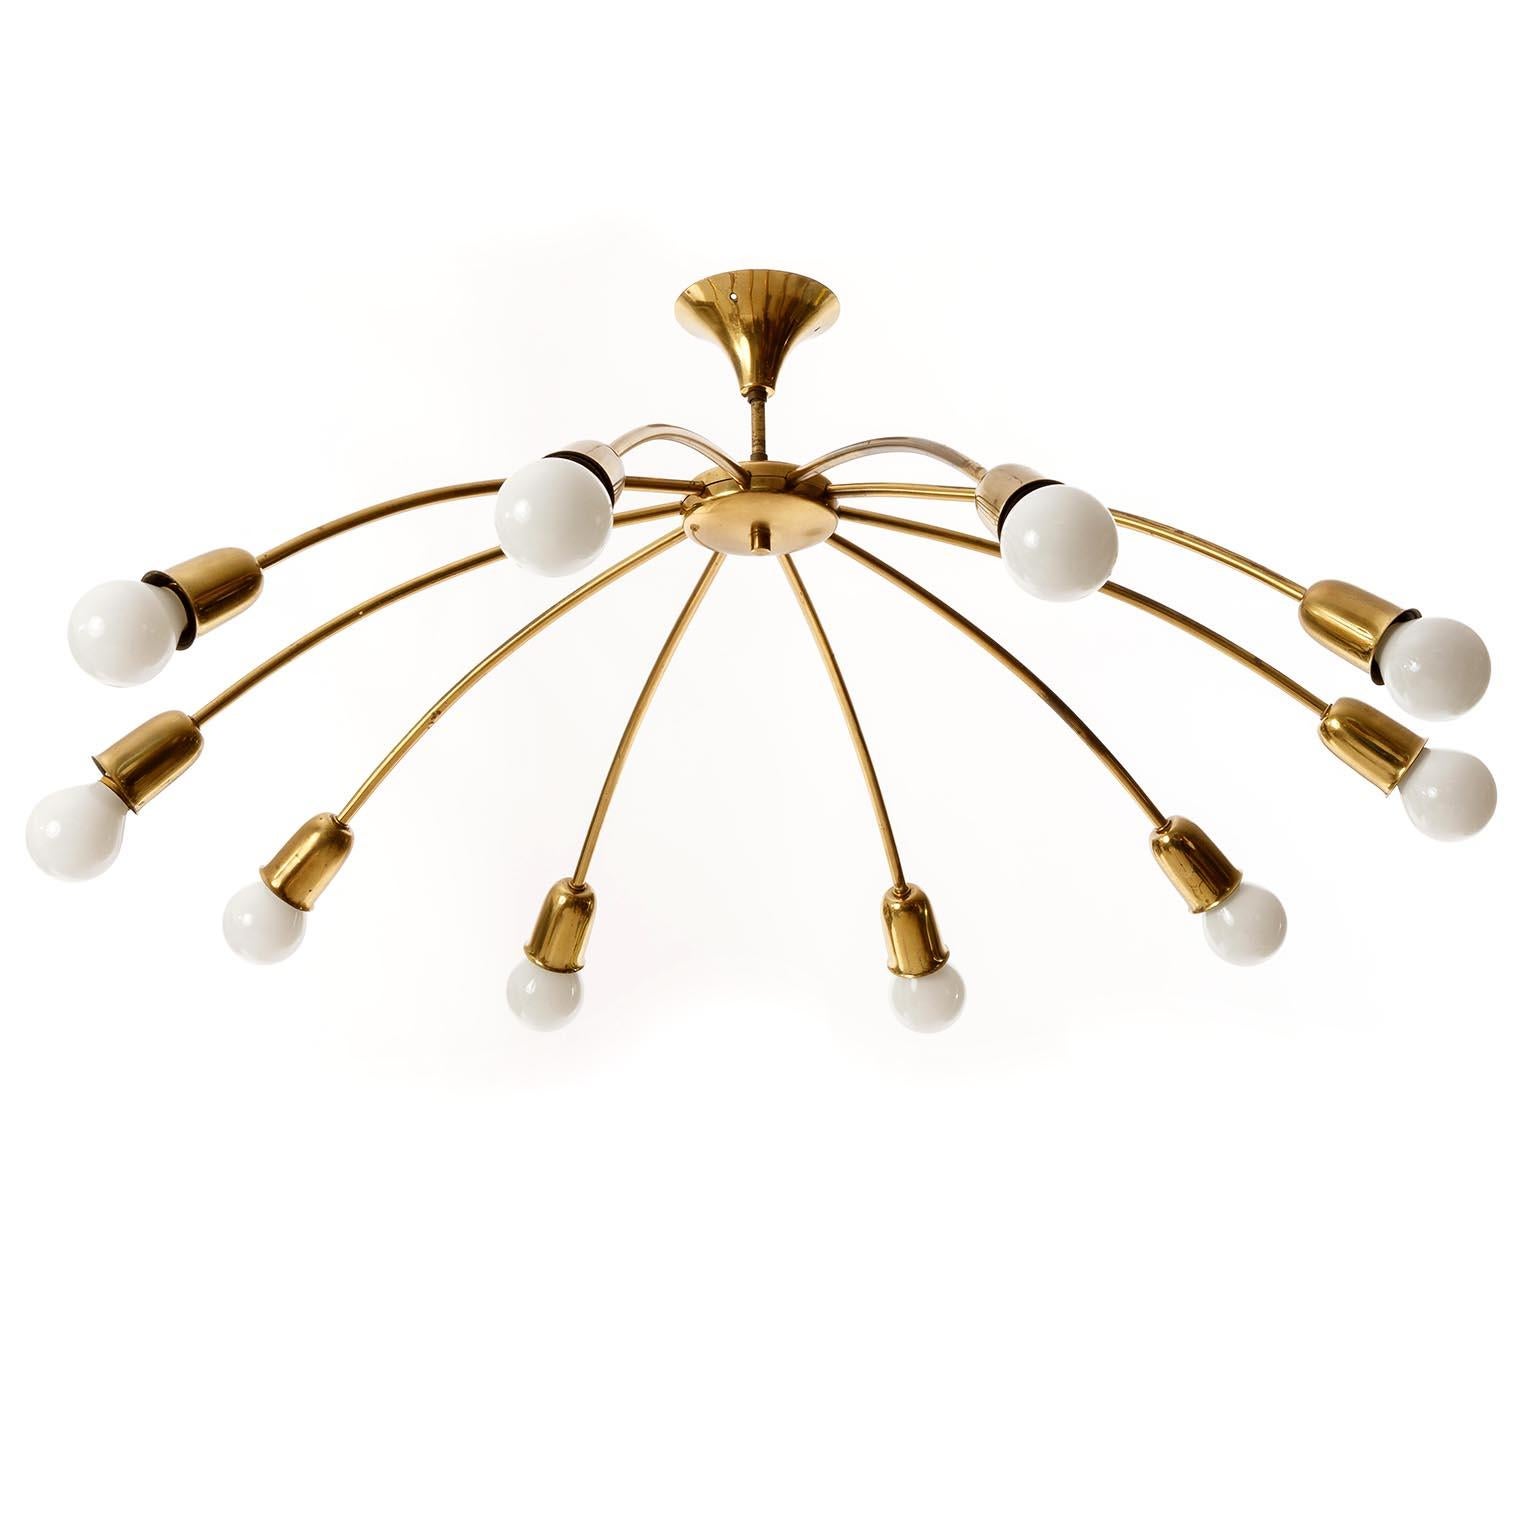 A ten-arm brass spider light fixture by Rupert Nikoll, Austria, Vienna, manufactured in midcentury in 1960s.
This beautiful fixture is made of natural aged solid brass in a warm rich tone with little and very nice patina. It has 10 curved arms with